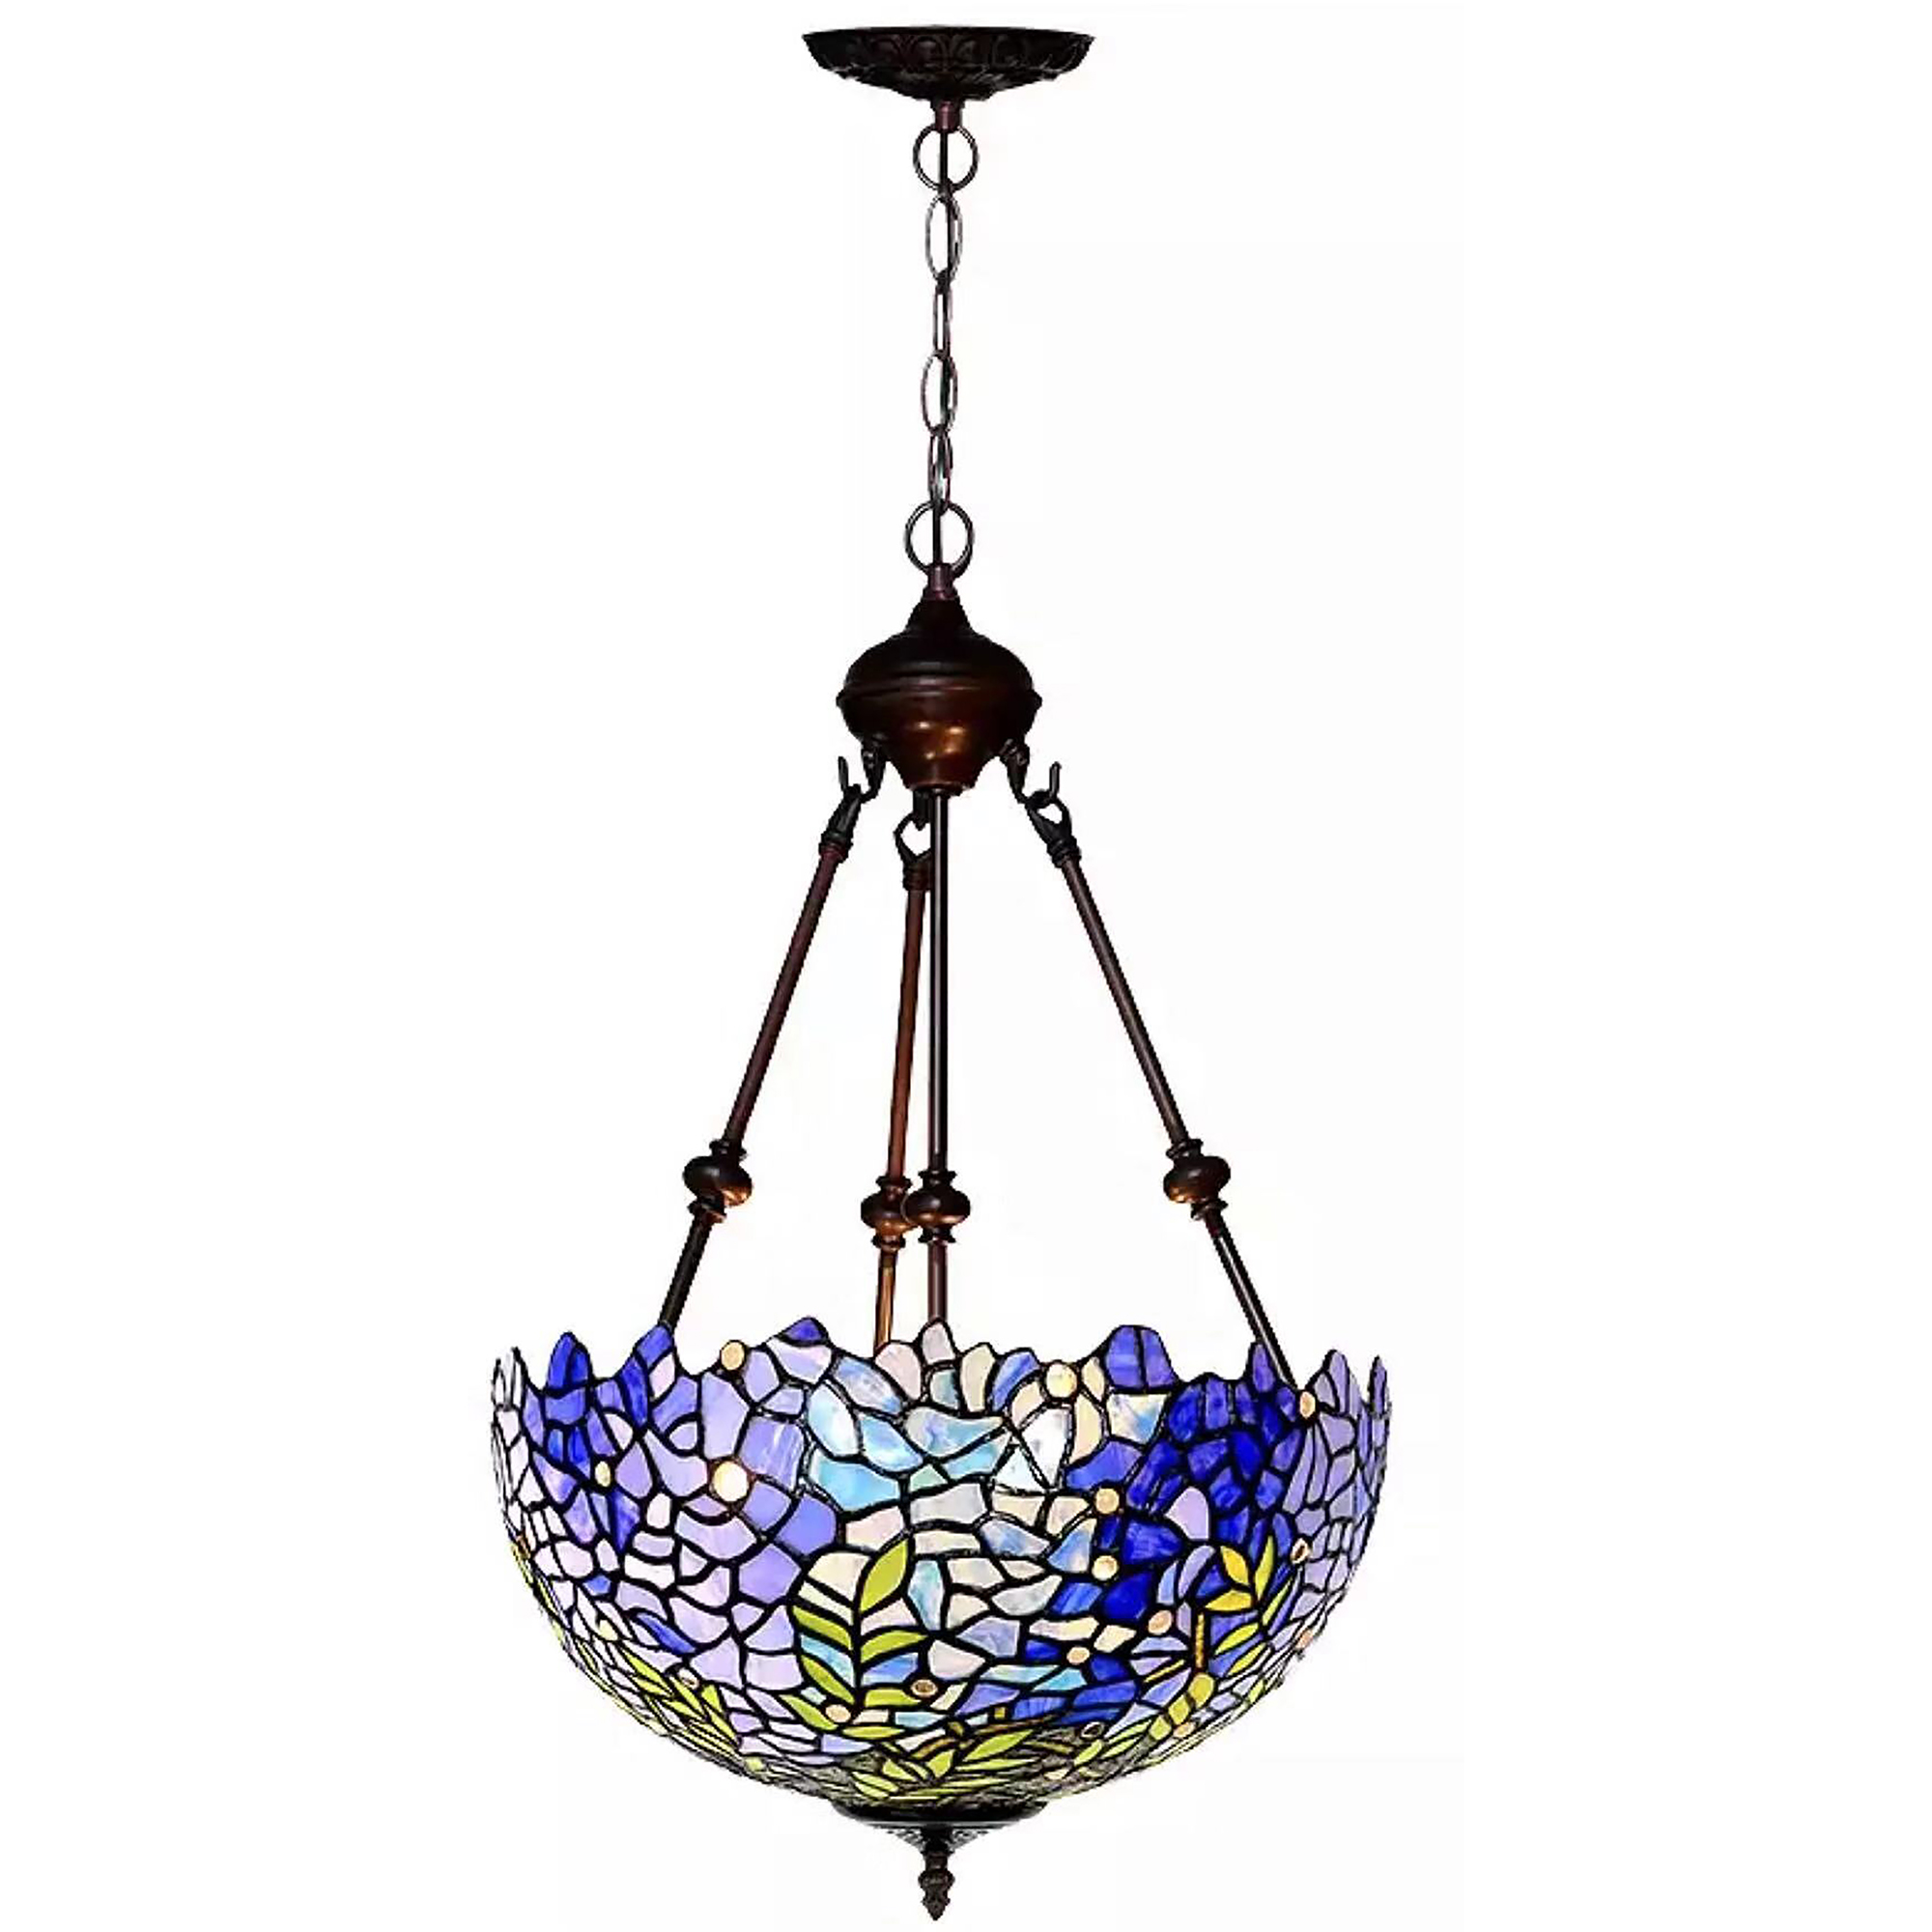 Baronn Wisteria Design Stained Glass 2-Light Tiffany-Style Chandelier